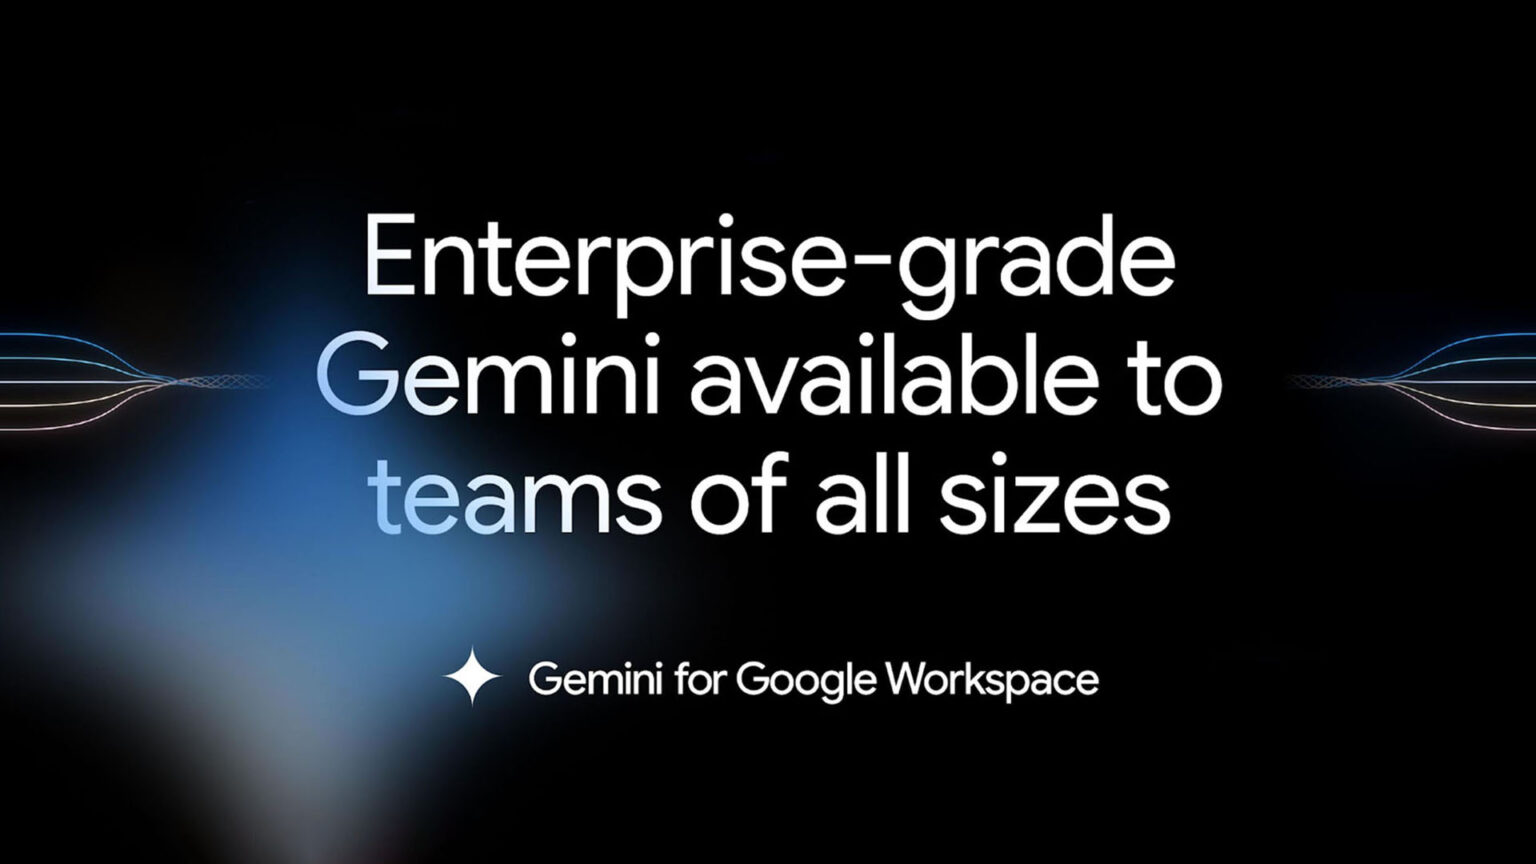 How to use Gemini in workspace